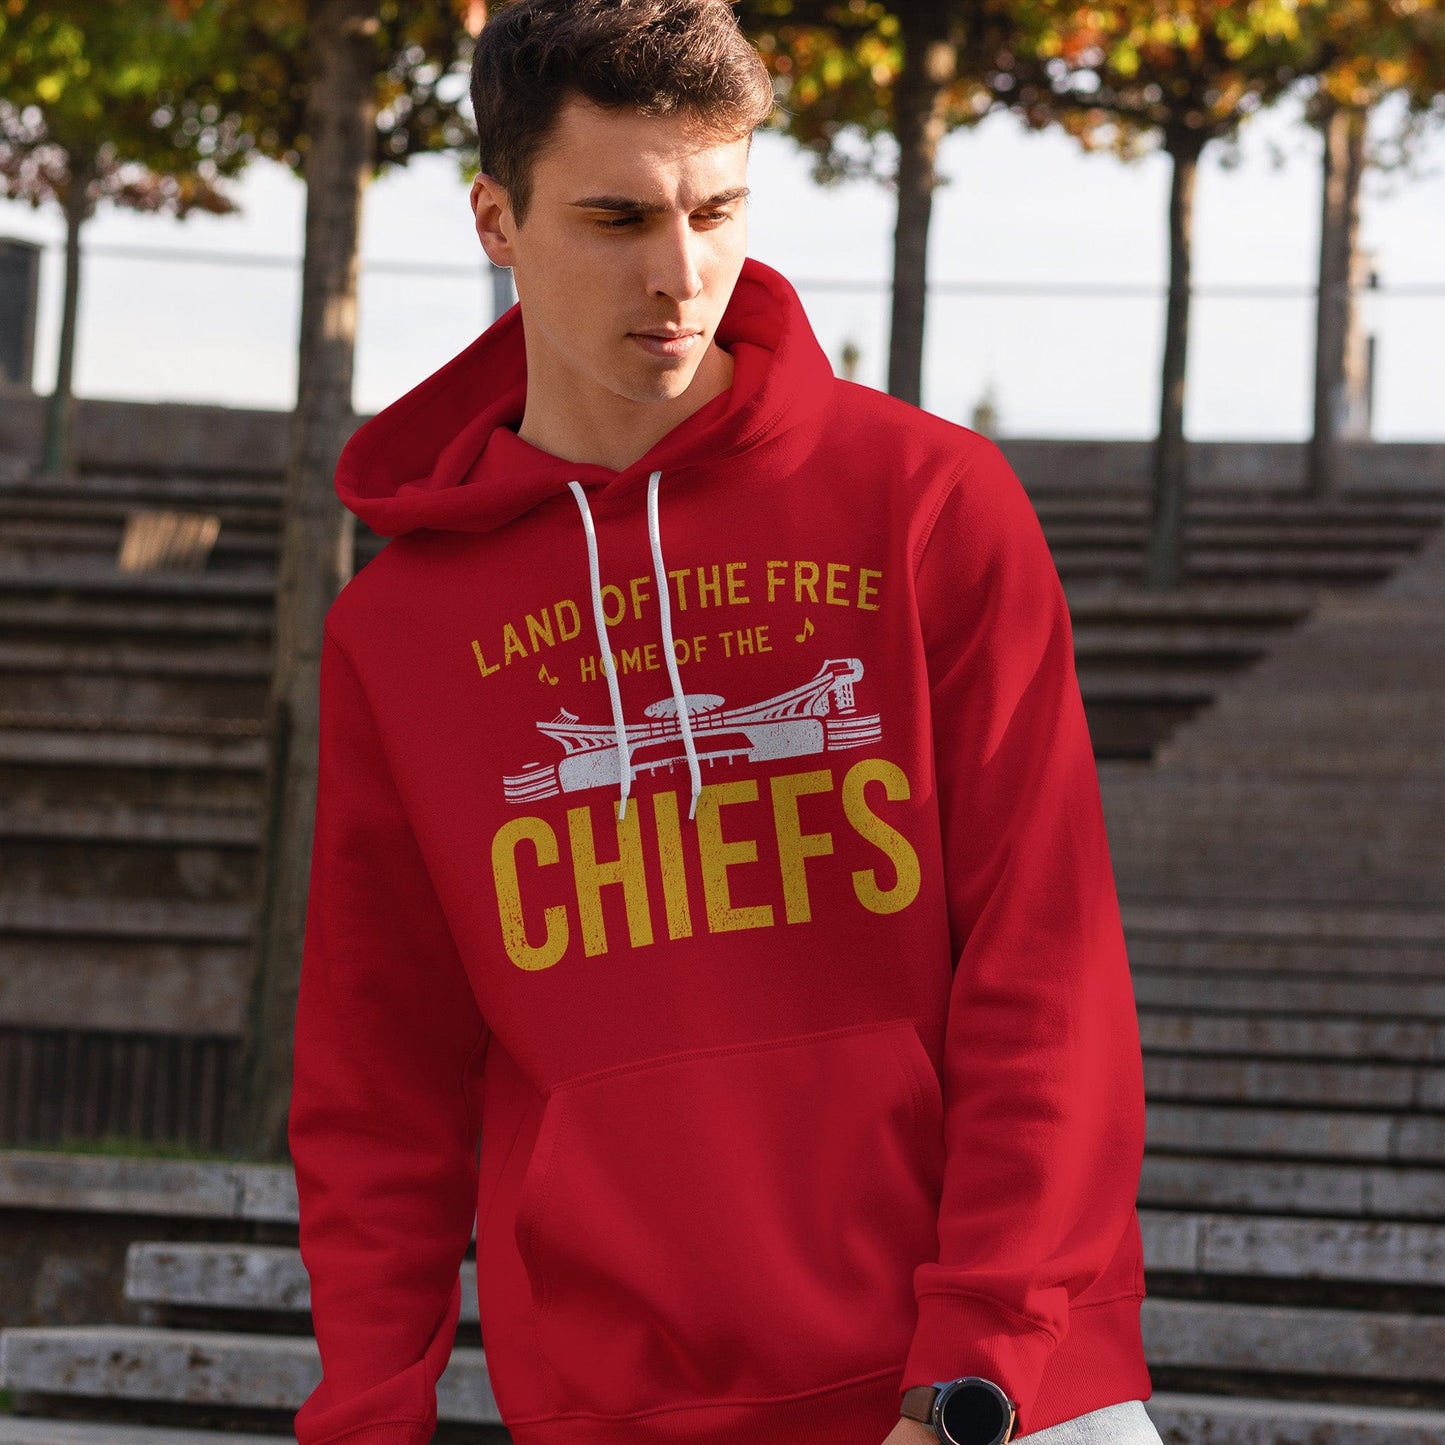 KC Swag | Kansas City Chiefs white/gold HOME OF THE CHIEFS on red sponge-fleece pullover hoodie worn by male model standing on stairs in open-air amphitheater